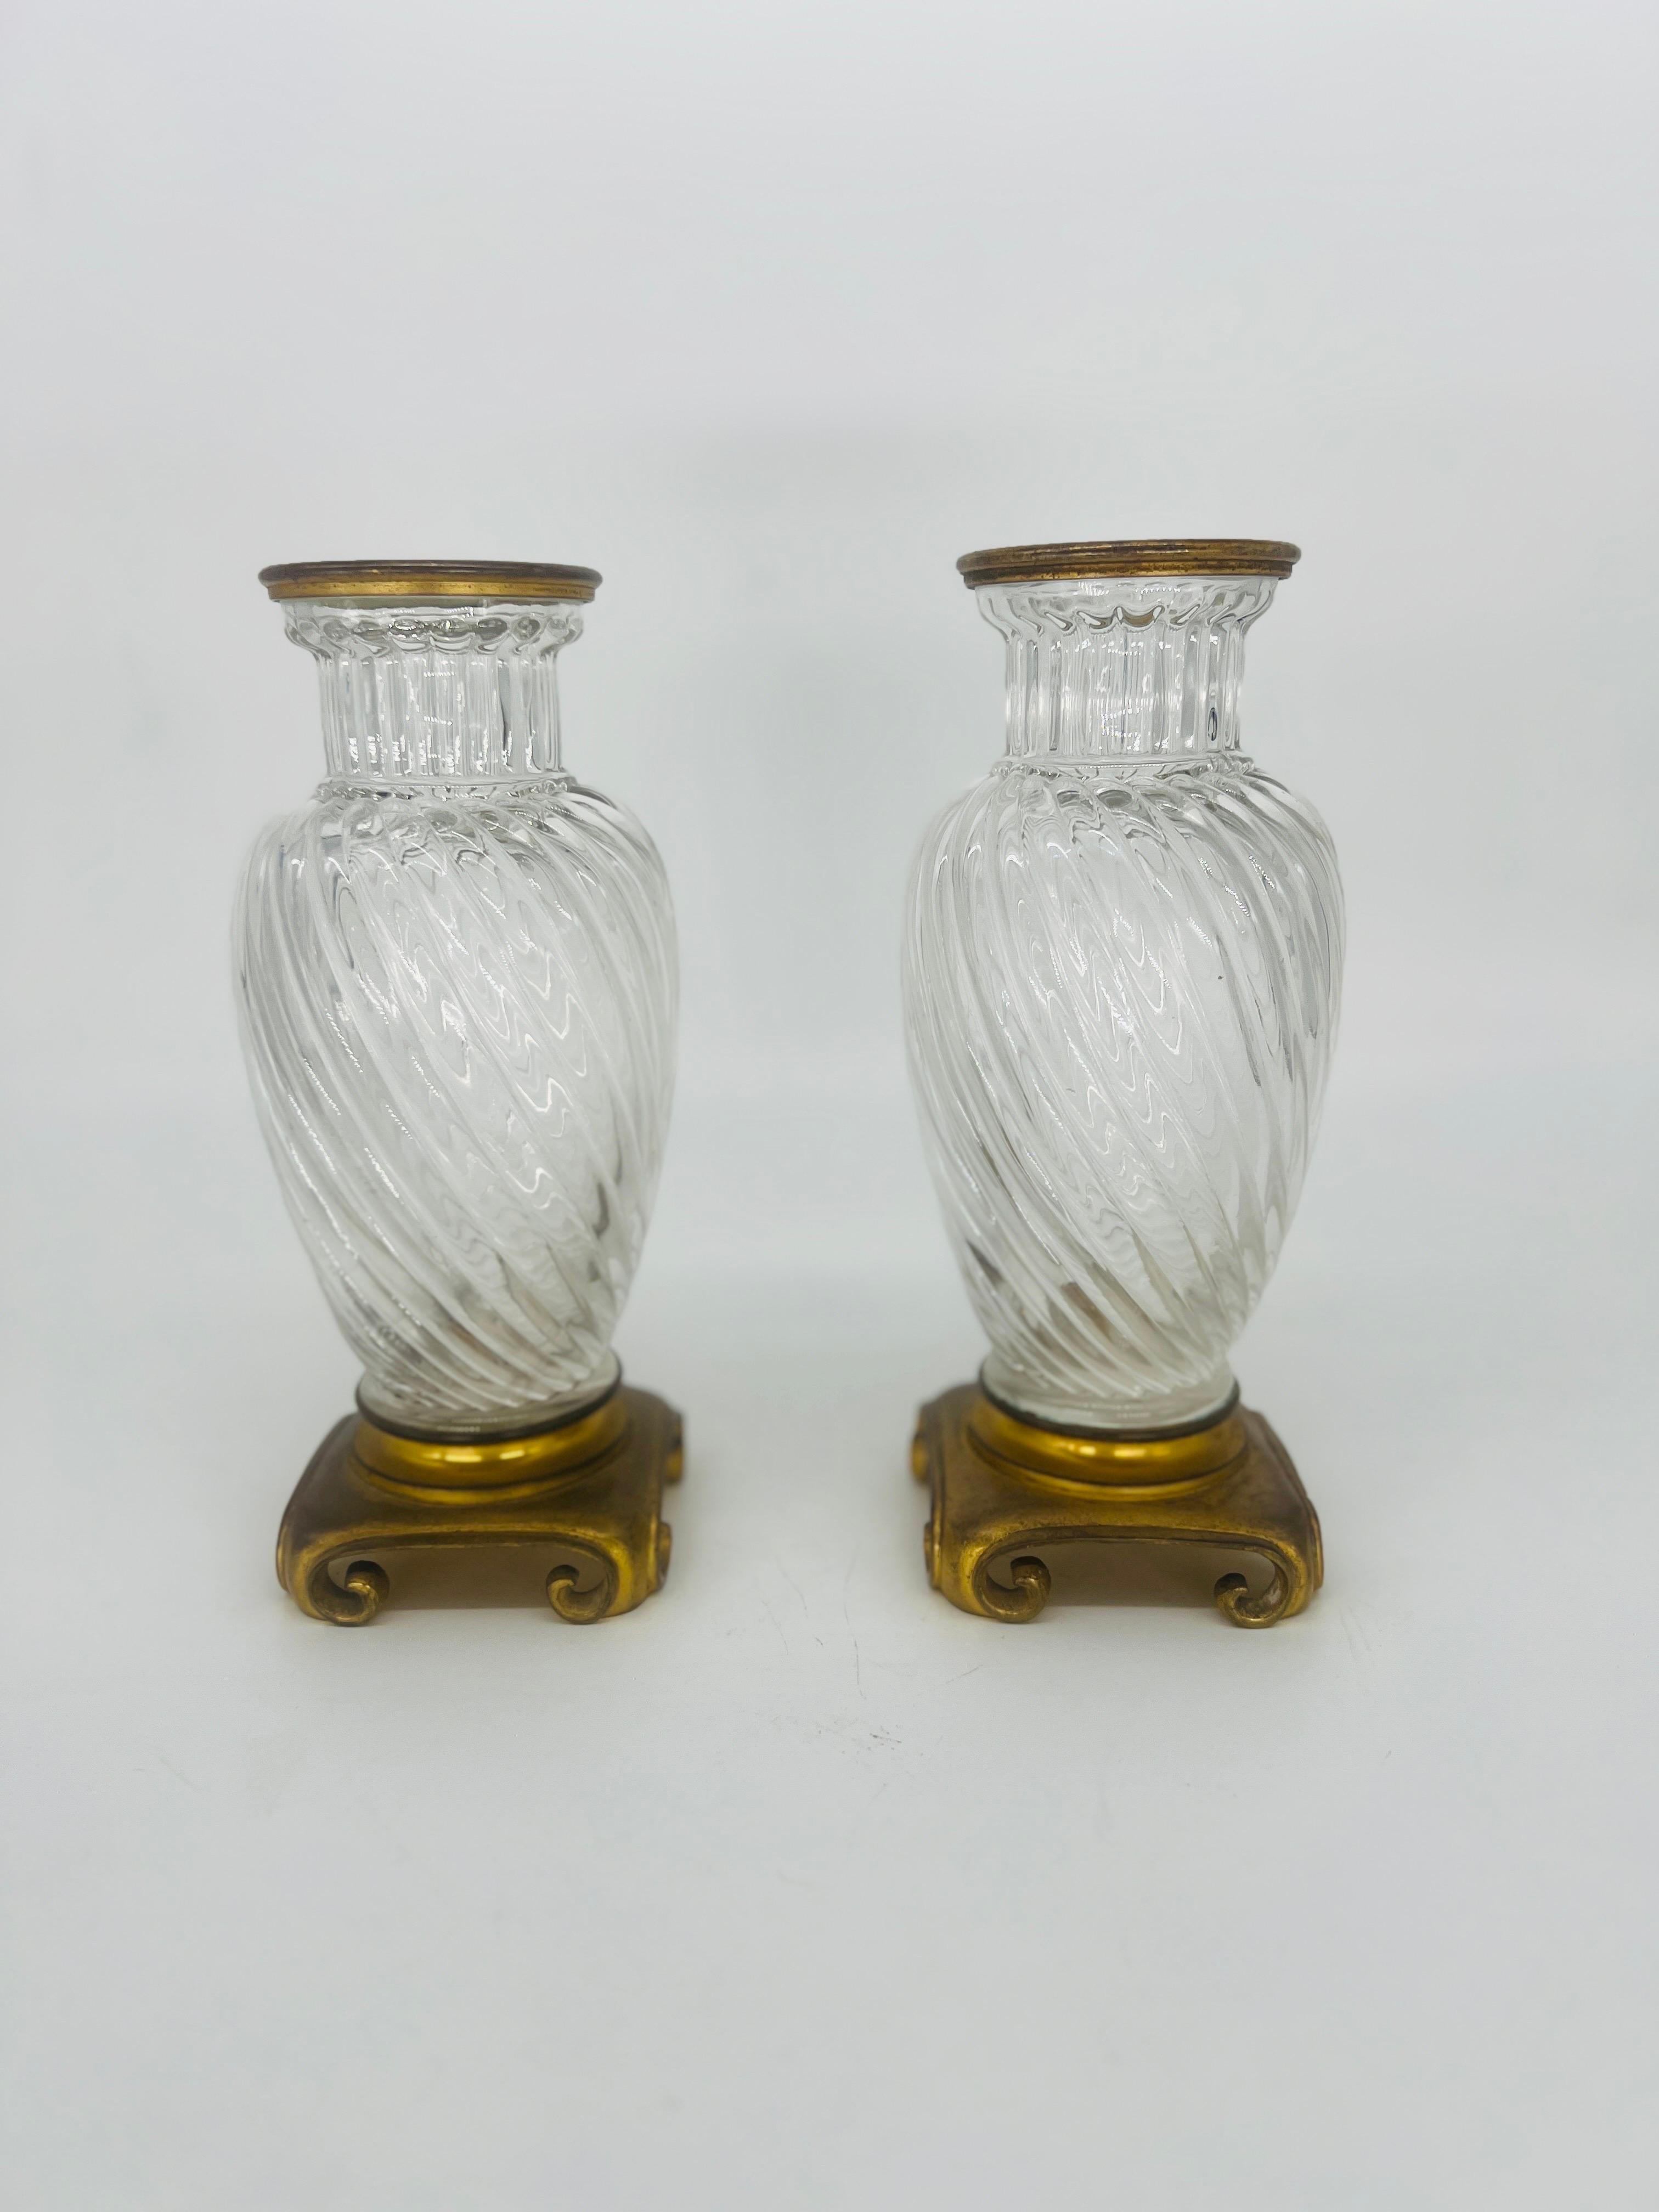 Pair, 19th century Baccarat Swirl Pattern Bronze Ormolu Mounted Crystal Vases.
These pair of 19th century French crystal vases have the iconic Baccarat swirl pattern to the body, bronze ormolu mounts to rim and mounted to a pair of chinoiserie